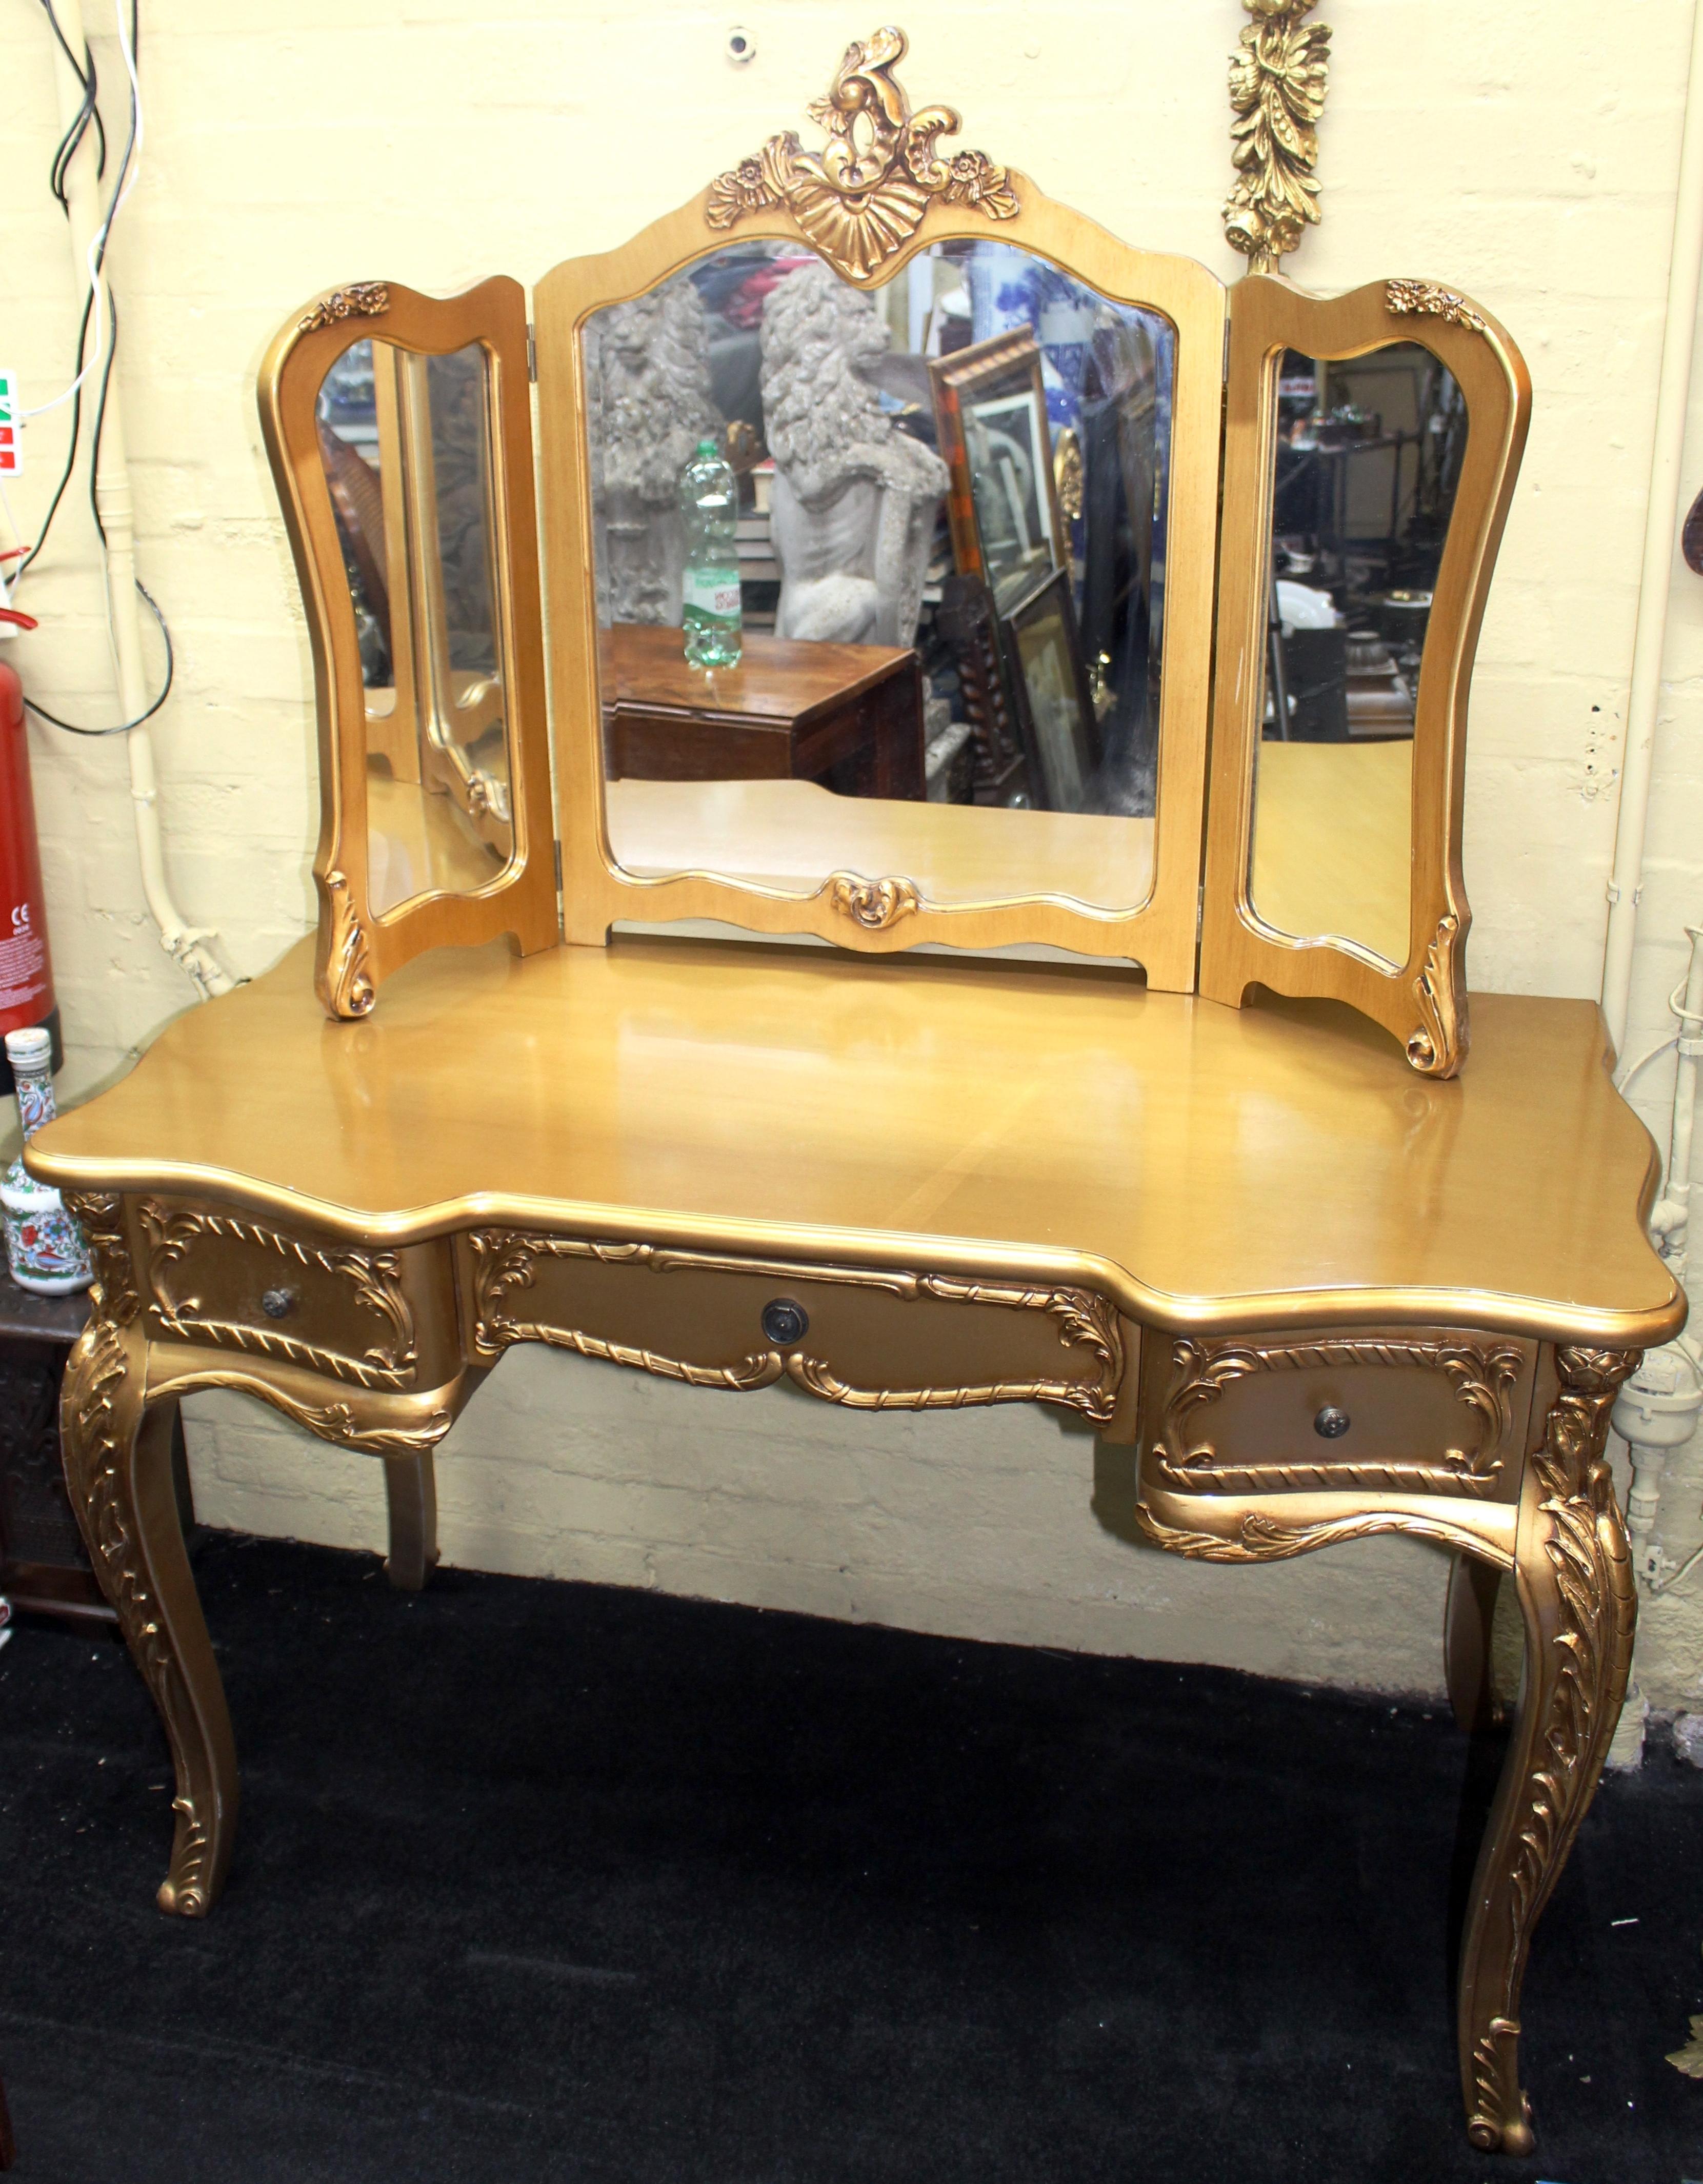 Width 119 cm 47in
Depth 61 cm 24 in
Height (to top) 155 cm 61 in
Height (to surface) 76 cm 39 3/4 in





Dressing table and mirror
Style French
Composition carved wood
Finish antiqued gilt
Condition: Very good conditon. One or two very